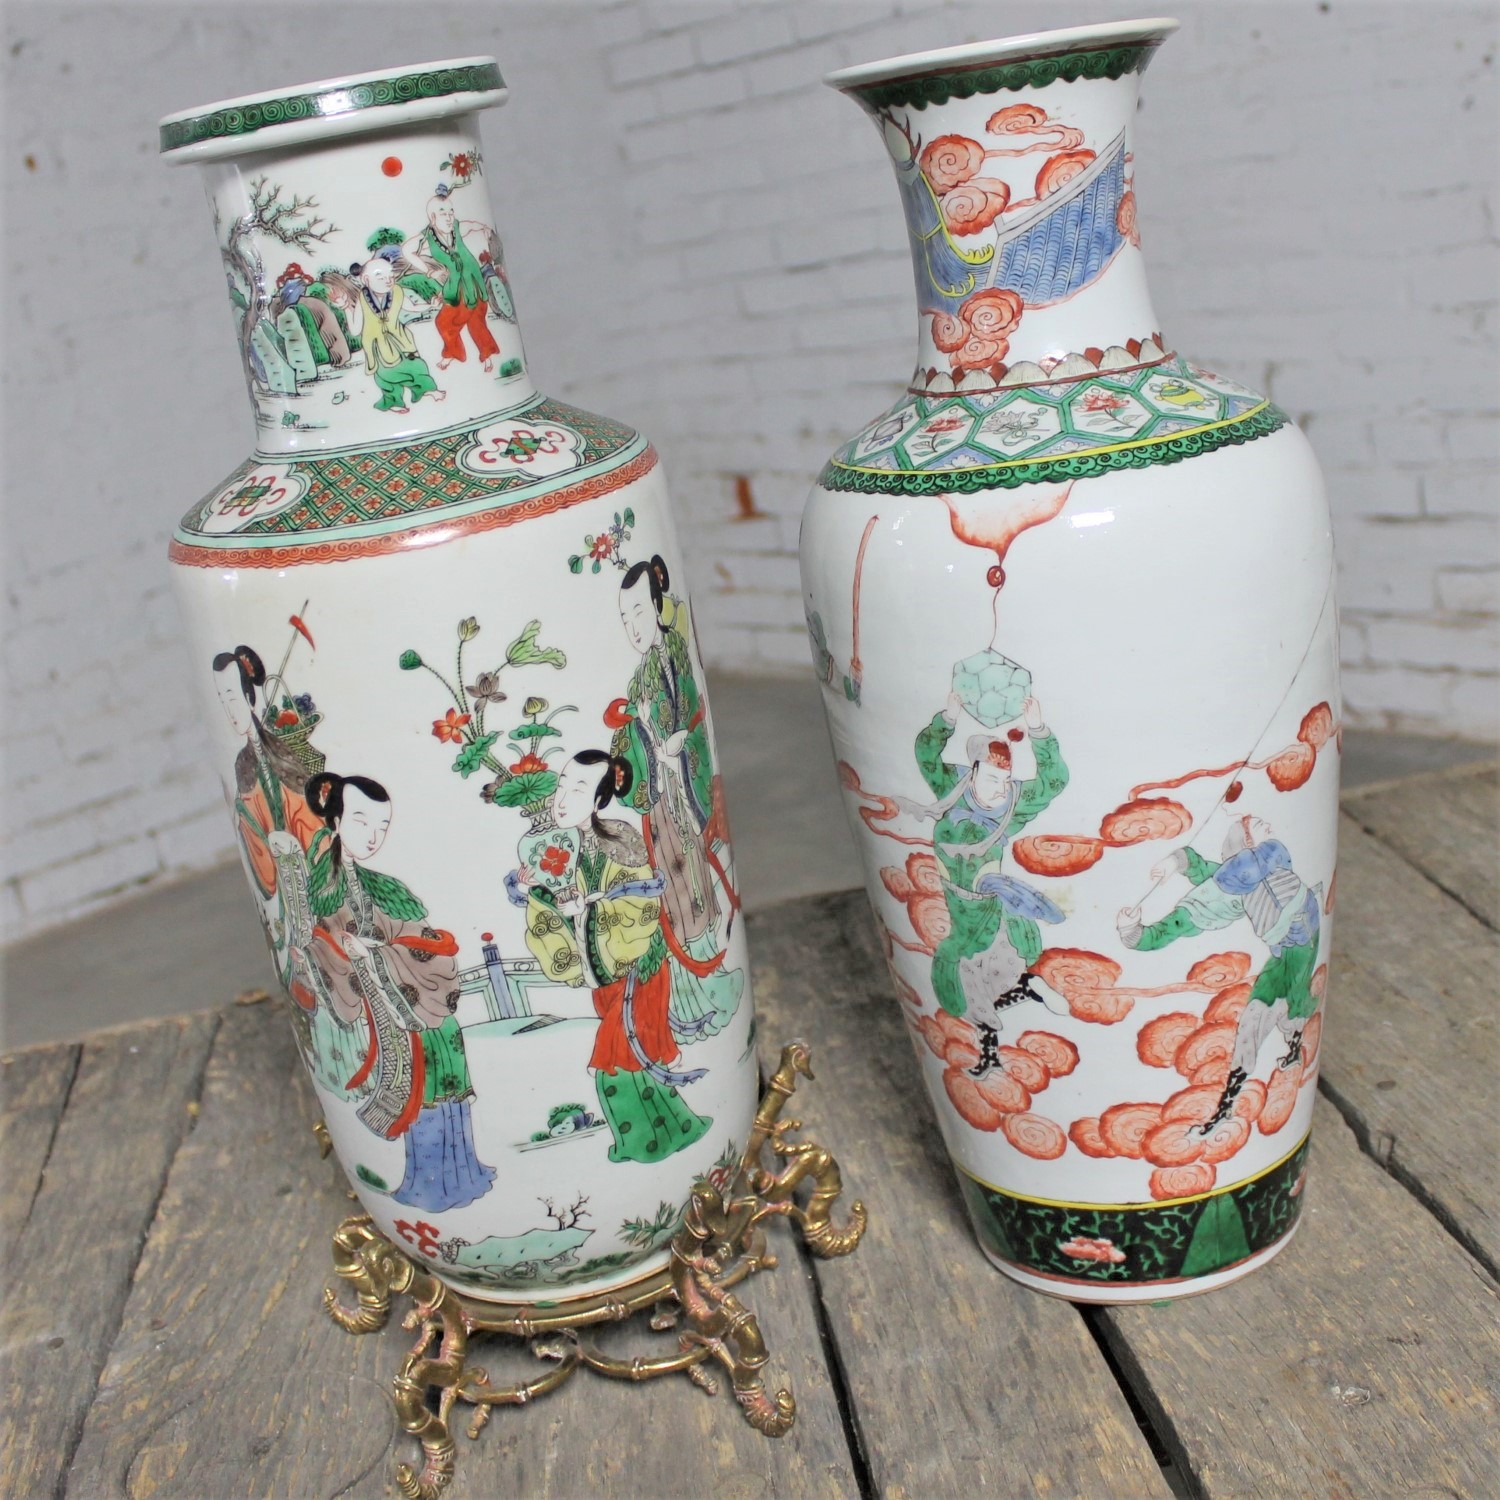 Large Antique Chinese Qing Famille Vert Porcelain Vases an Unmatched Pair